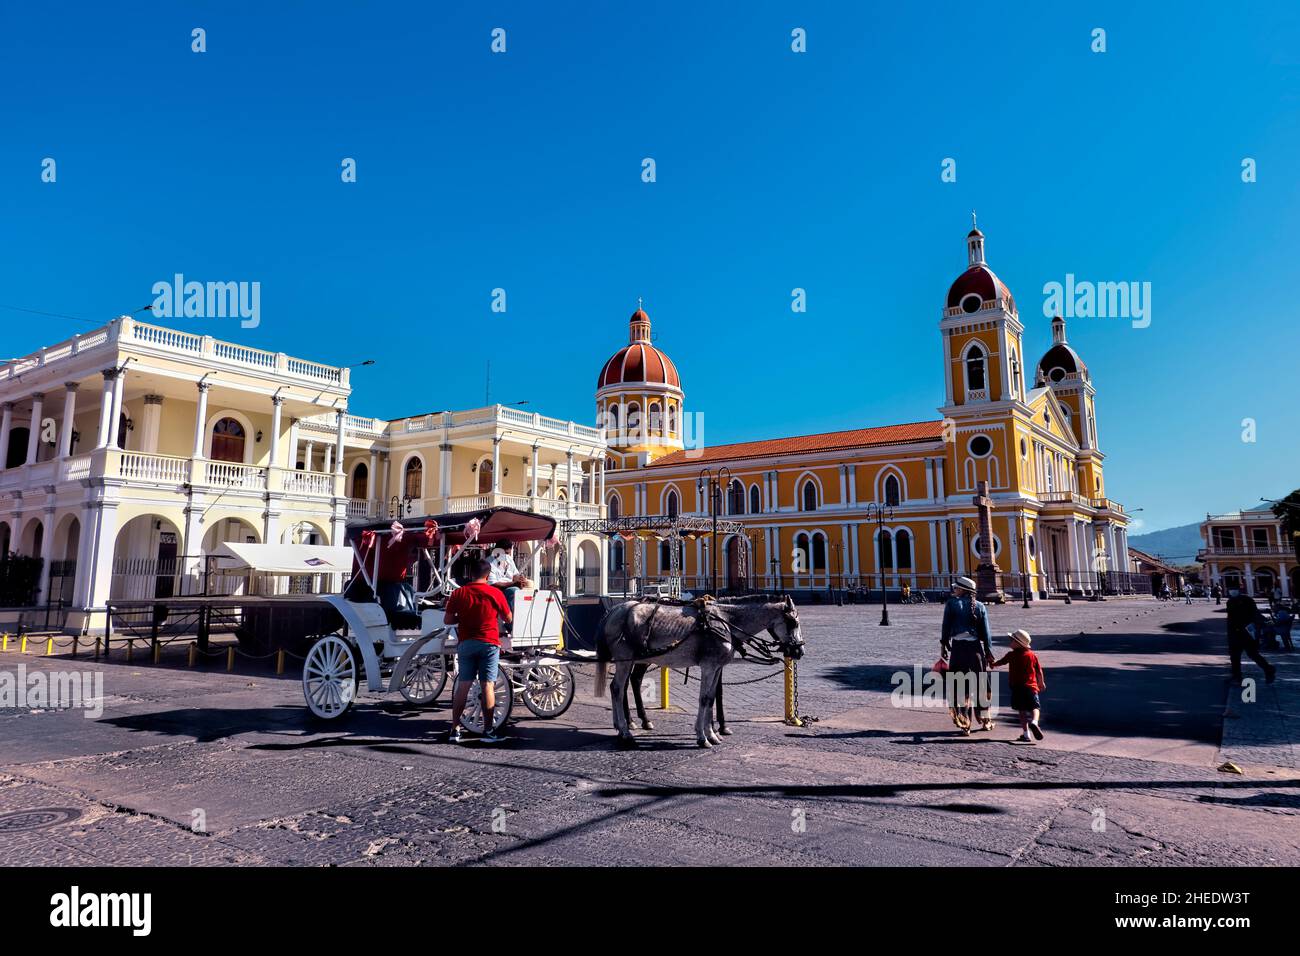 Horse and carriage sightseeing at the Granada Cathedral (Our Lady of the Assumption), Granada, Nicaragua Stock Photo